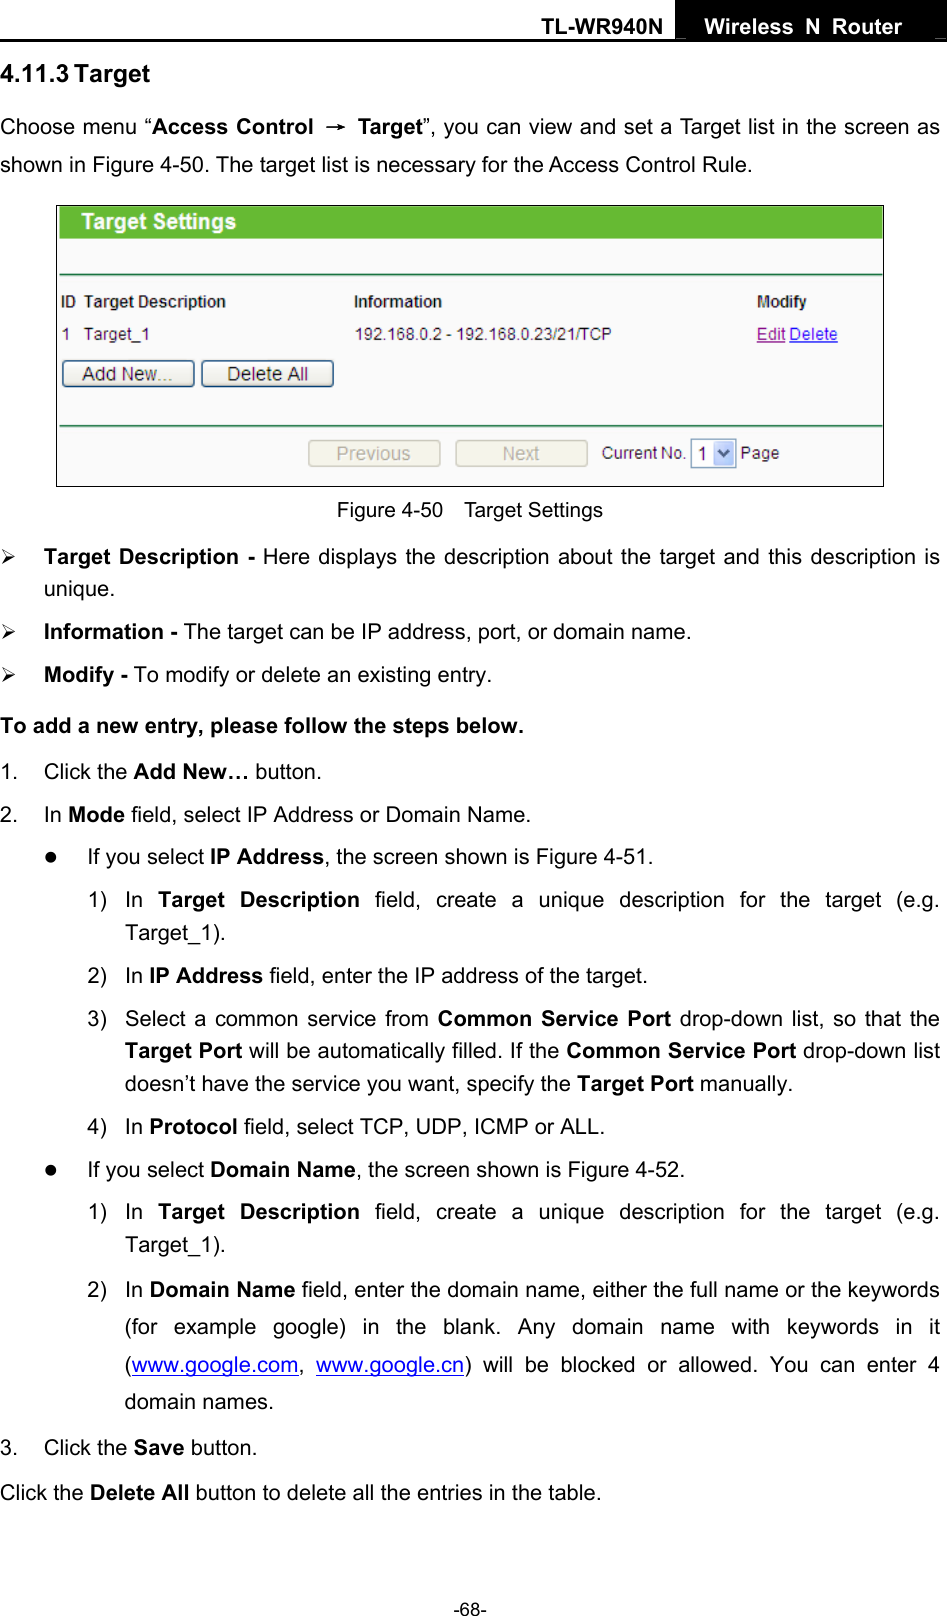 TL-WR940N  Wireless N Router   4.11.3 Target Choose menu “Access Control  → Target”, you can view and set a Target list in the screen as shown in Figure 4-50. The target list is necessary for the Access Control Rule.  Figure 4-50  Target Settings ¾ Target Description - Here displays the description about the target and this description is unique.  ¾ Information - The target can be IP address, port, or domain name.   ¾ Modify - To modify or delete an existing entry.   To add a new entry, please follow the steps below. 1. Click the Add New… button. 2. In Mode field, select IP Address or Domain Name. z If you select IP Address, the screen shown is Figure 4-51.  1) In Target Description field, create a unique description for the target (e.g. Target_1). 2) In IP Address field, enter the IP address of the target. 3)  Select a common service from Common Service Port drop-down list, so that the Target Port will be automatically filled. If the Common Service Port drop-down list doesn’t have the service you want, specify the Target Port manually. 4) In Protocol field, select TCP, UDP, ICMP or ALL.  z If you select Domain Name, the screen shown is Figure 4-52. 1) In Target Description field, create a unique description for the target (e.g. Target_1). 2) In Domain Name field, enter the domain name, either the full name or the keywords (for example google) in the blank. Any domain name with keywords in it (www.google.com,  www.google.cn) will be blocked or allowed. You can enter 4 domain names. 3. Click the Save button. Click the Delete All button to delete all the entries in the table. -68- 